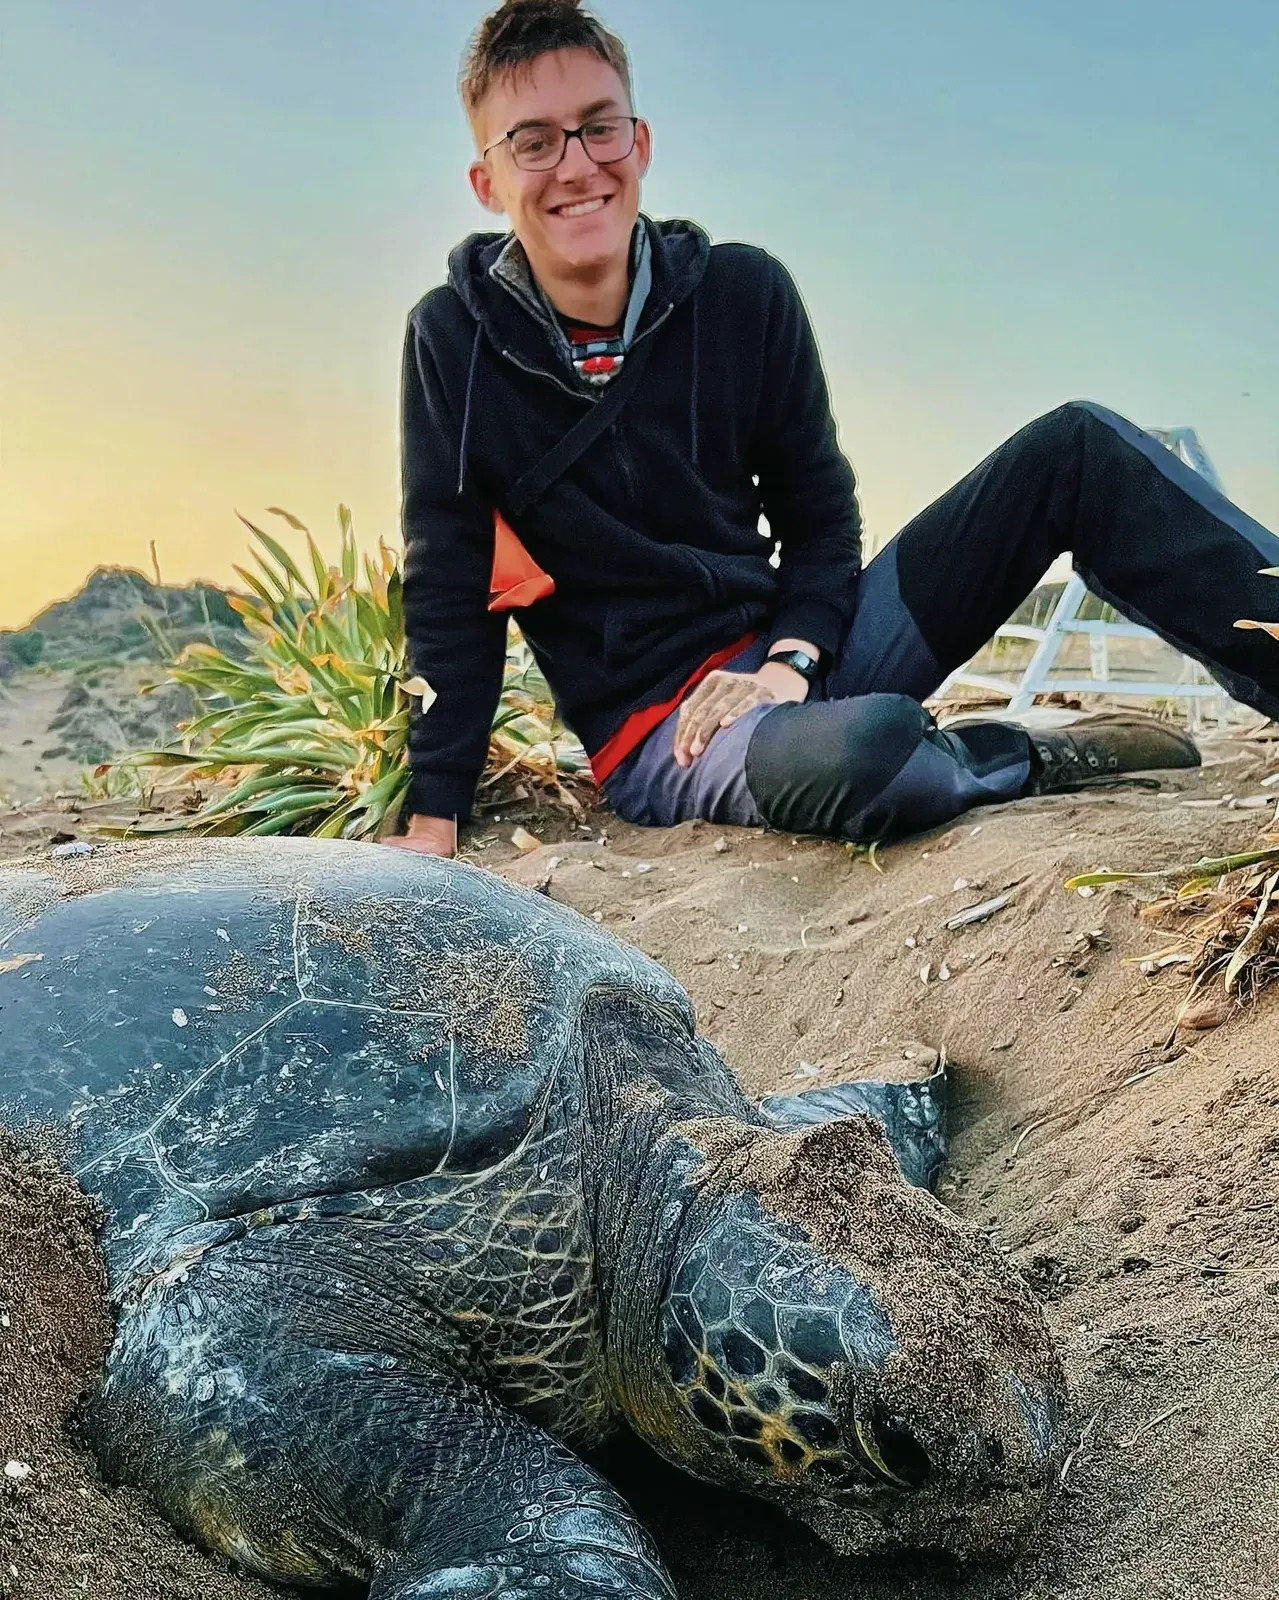 Man posing with a leatherback turtle on a sandy beach